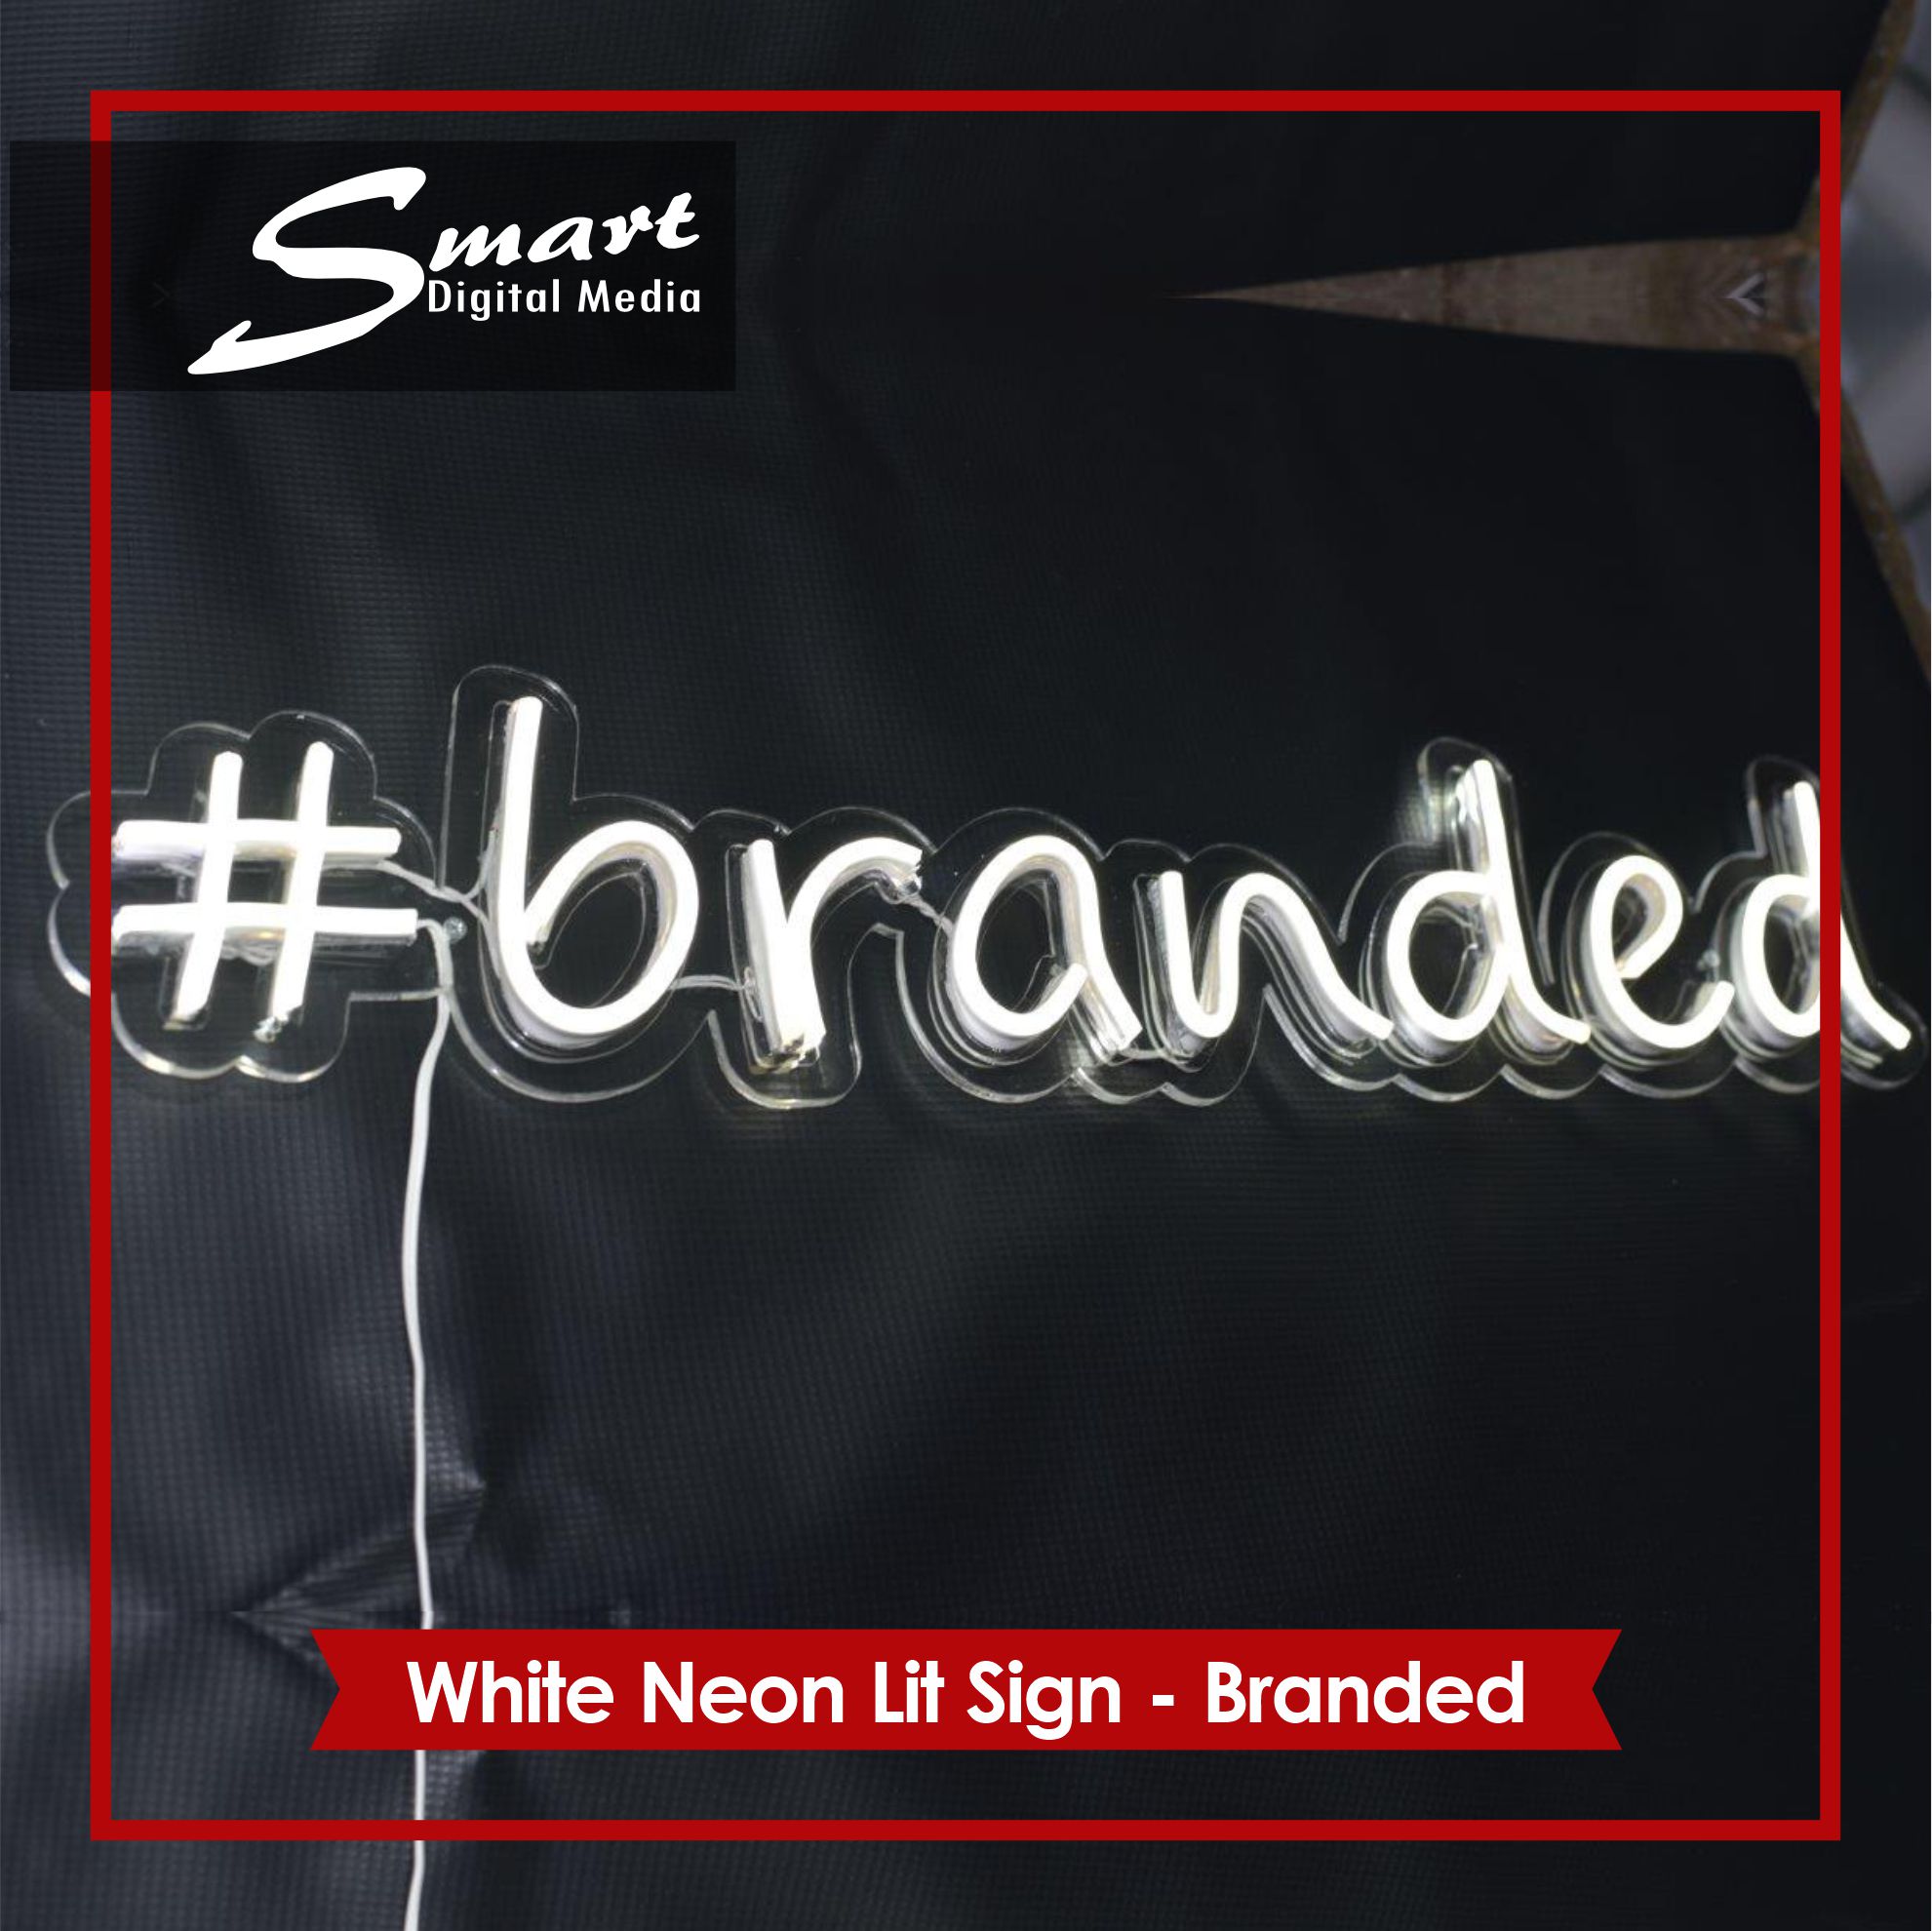 Happy and excited, newlyweds ordered this cool WHITE LED NEON Light and called it "Branded". Smart Digital Media made this from energy-saving and safe neon flex tubing.